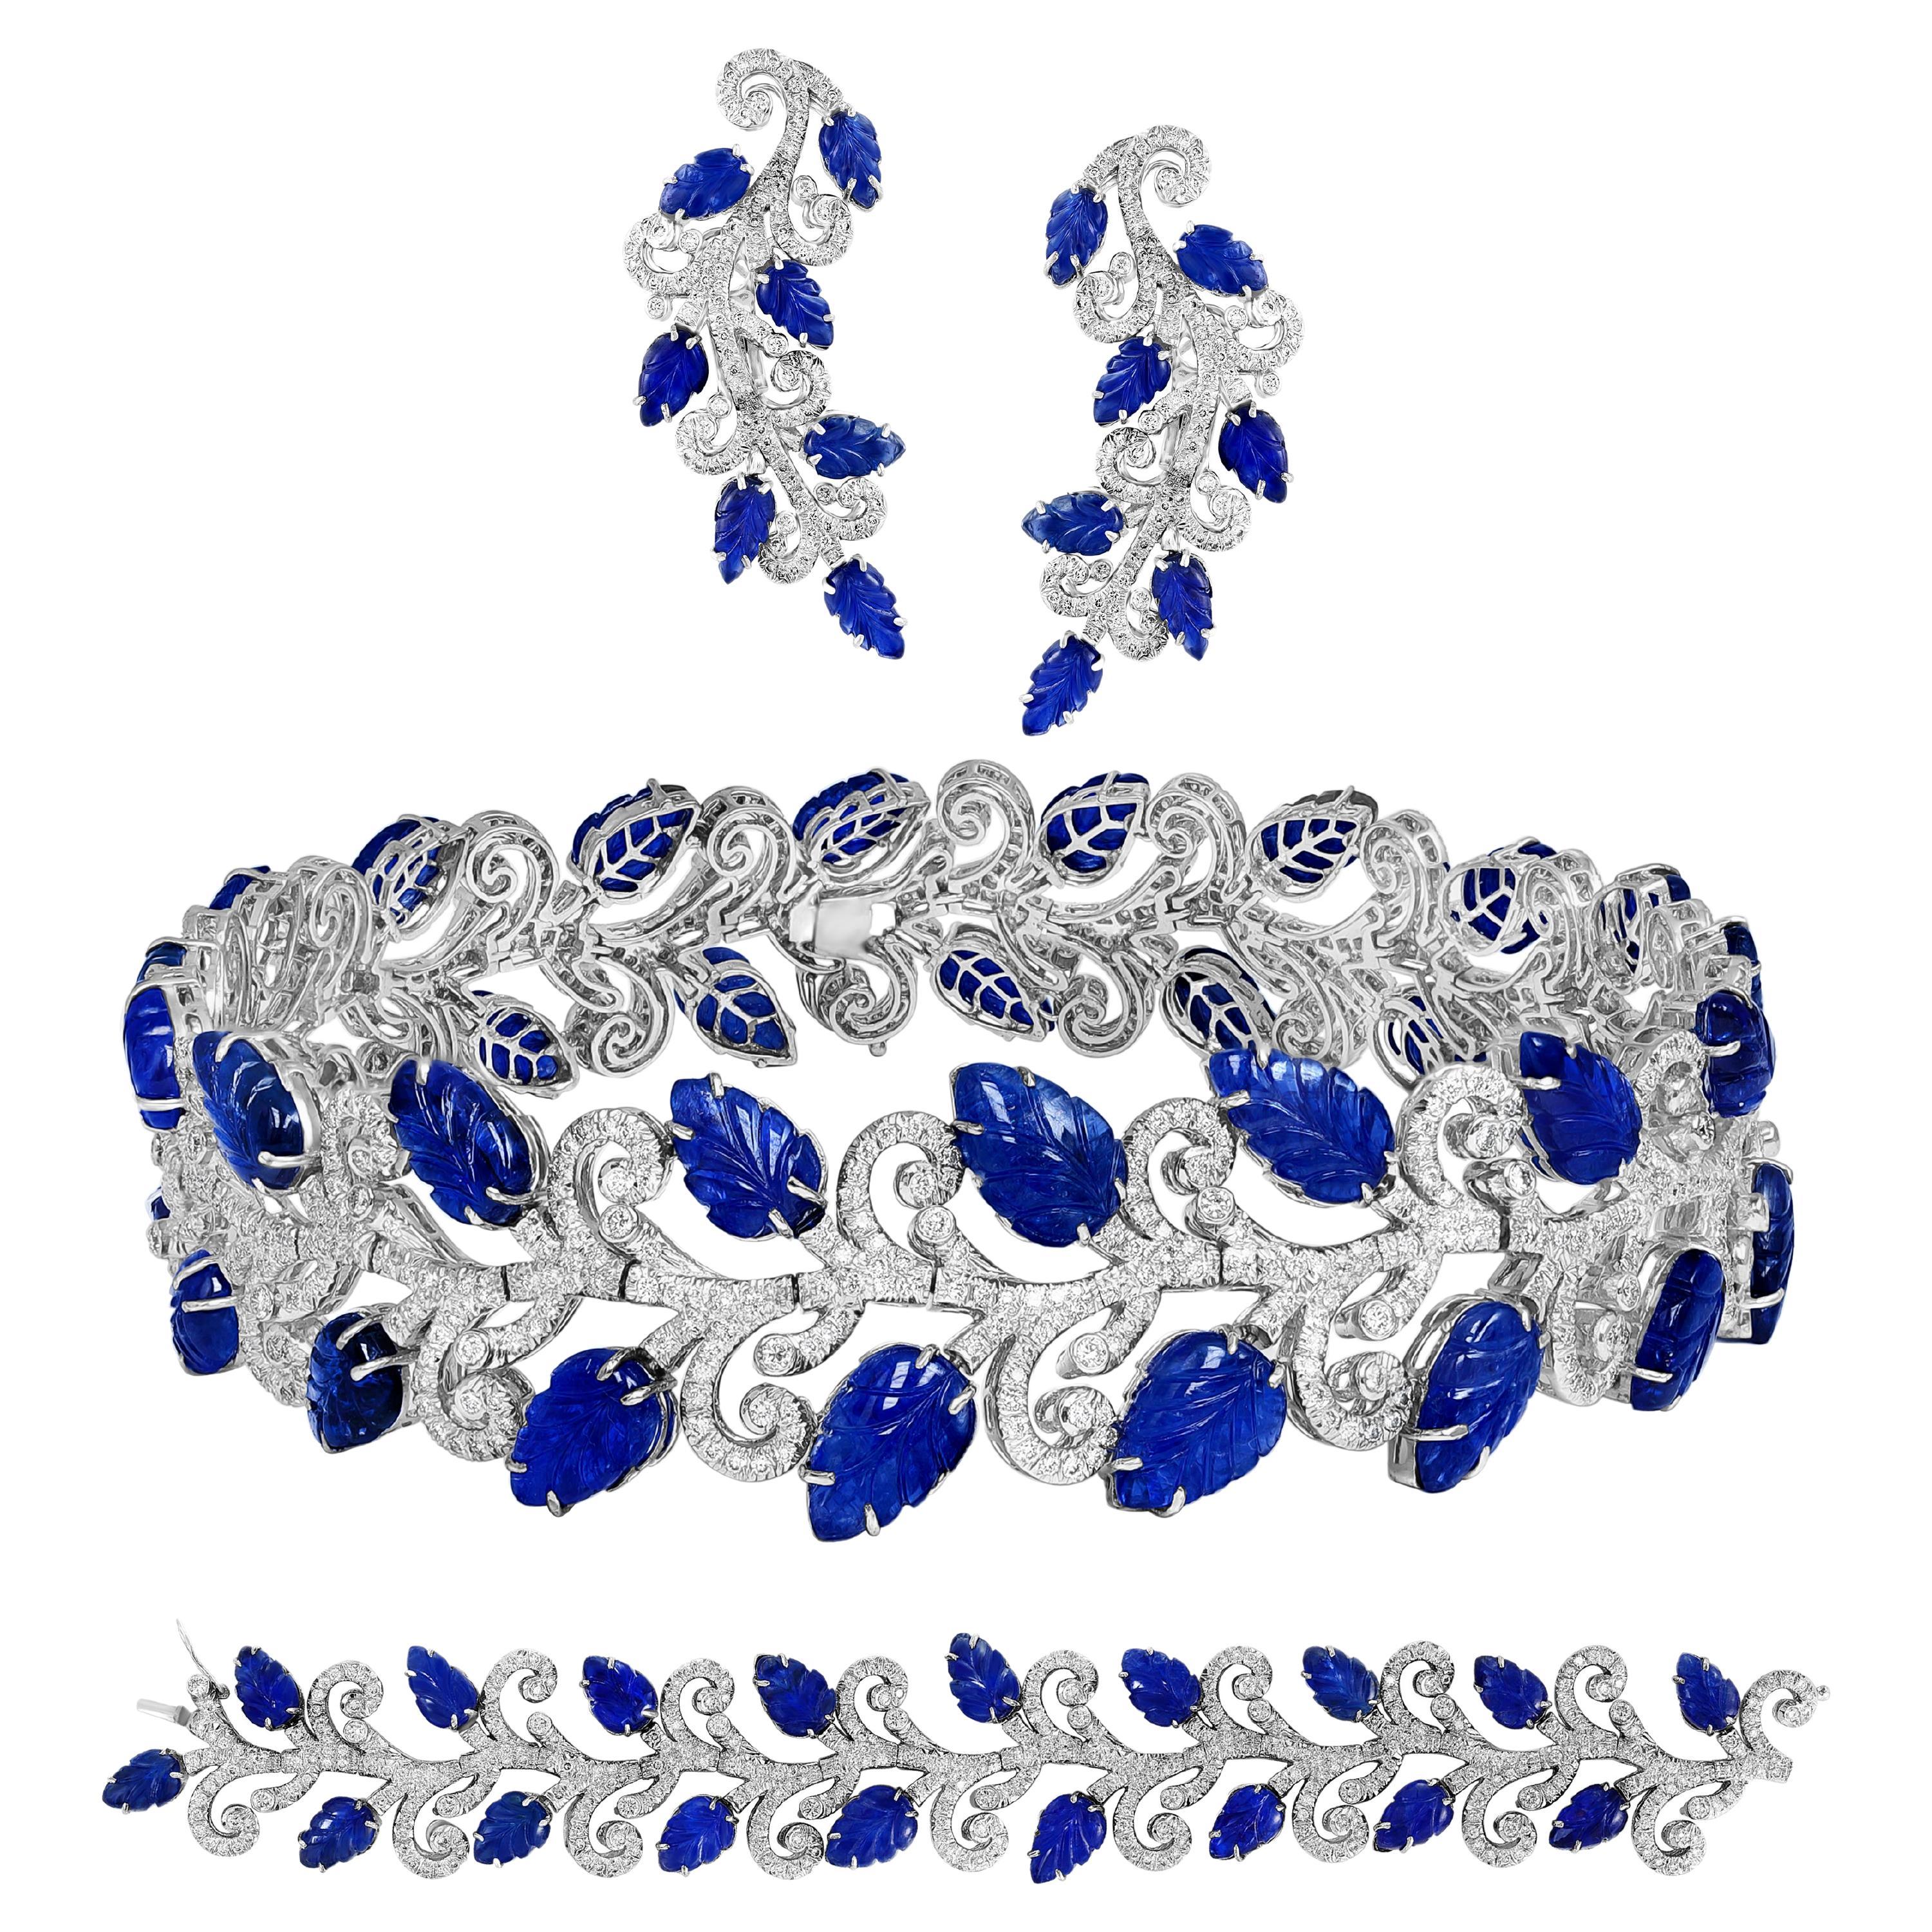 330 Ct Natural Carved Blue Sapphire & 65 Ct Diamond Necklace Bracelet & Earring For Sale